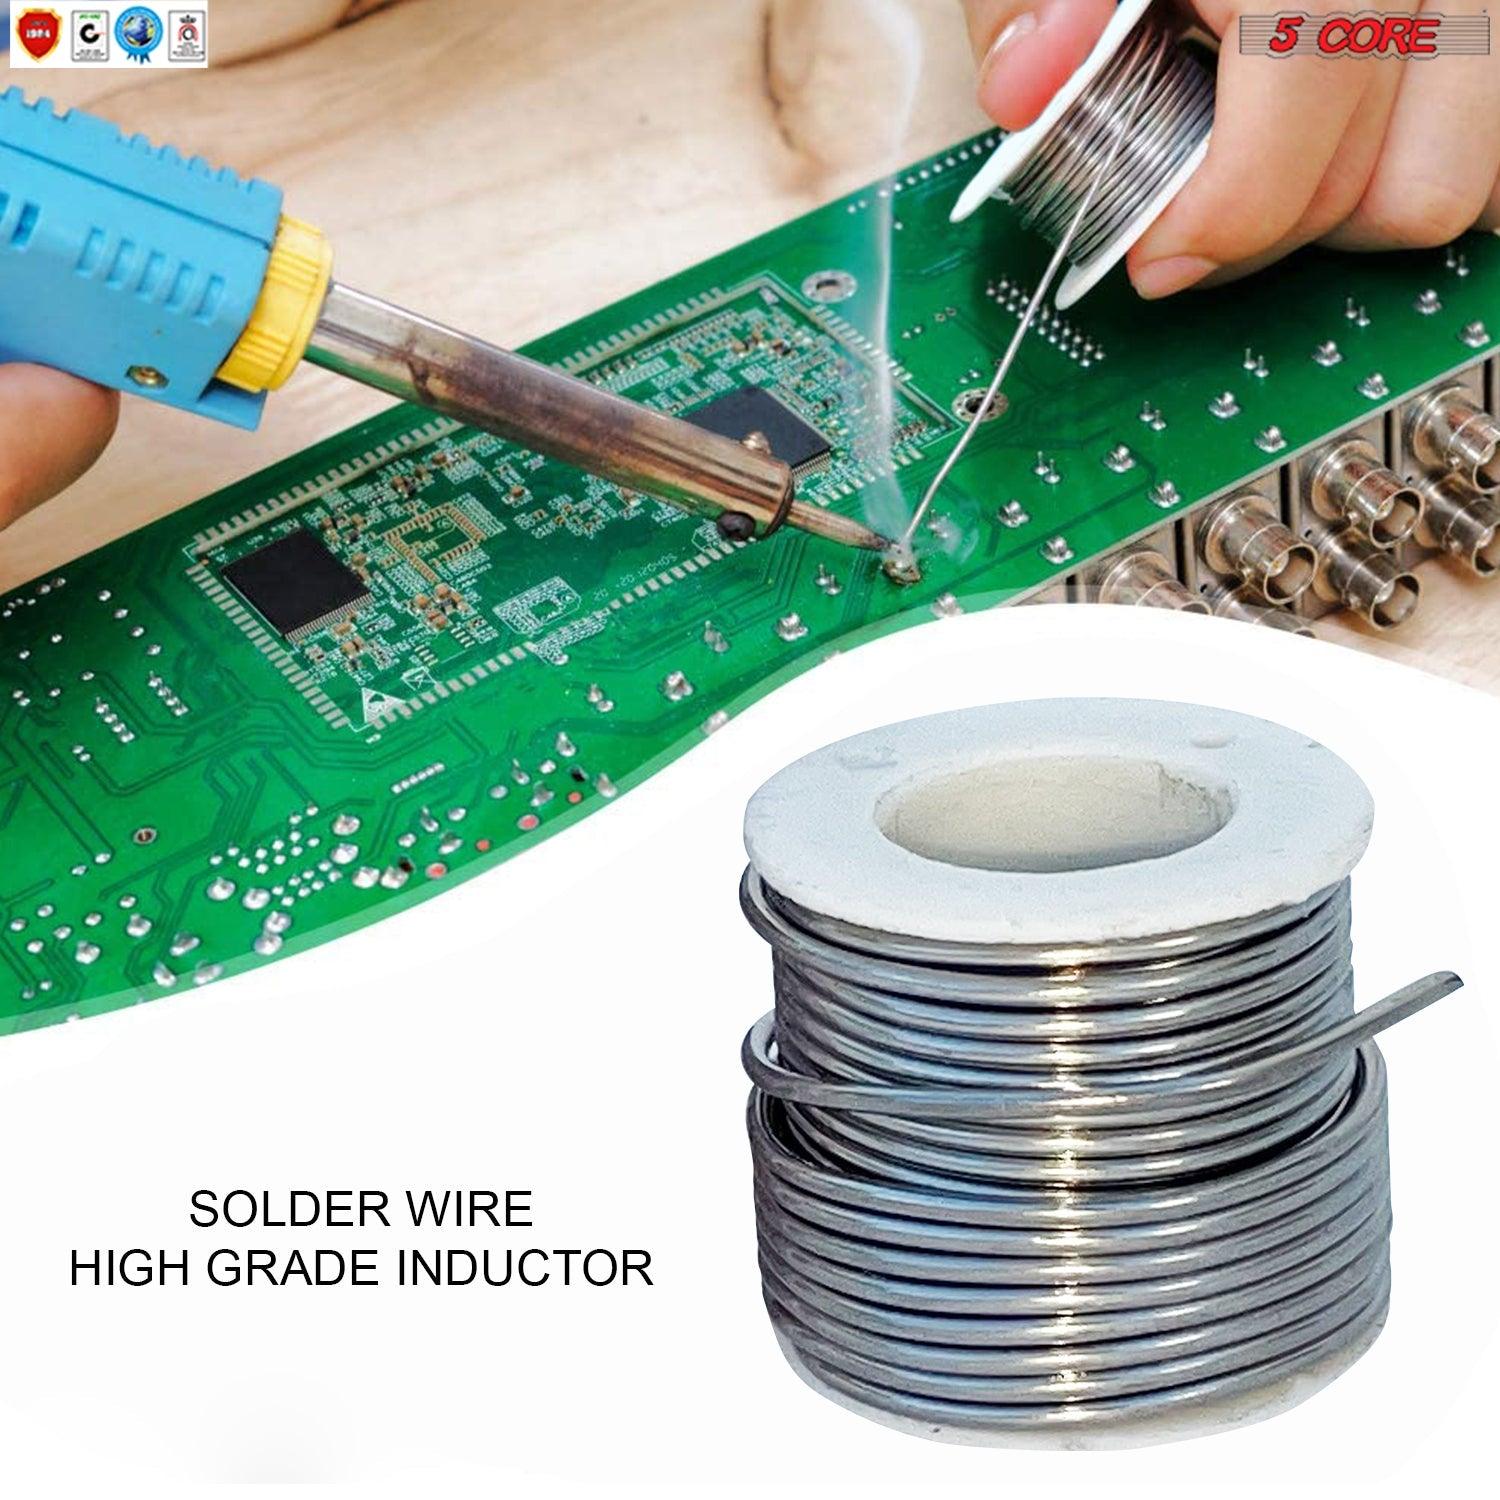 5 Core Solder Wire 5 Pack Rosin Core Flux Soldering Wire 63/37 63% Tin - VirtuousWares:Global